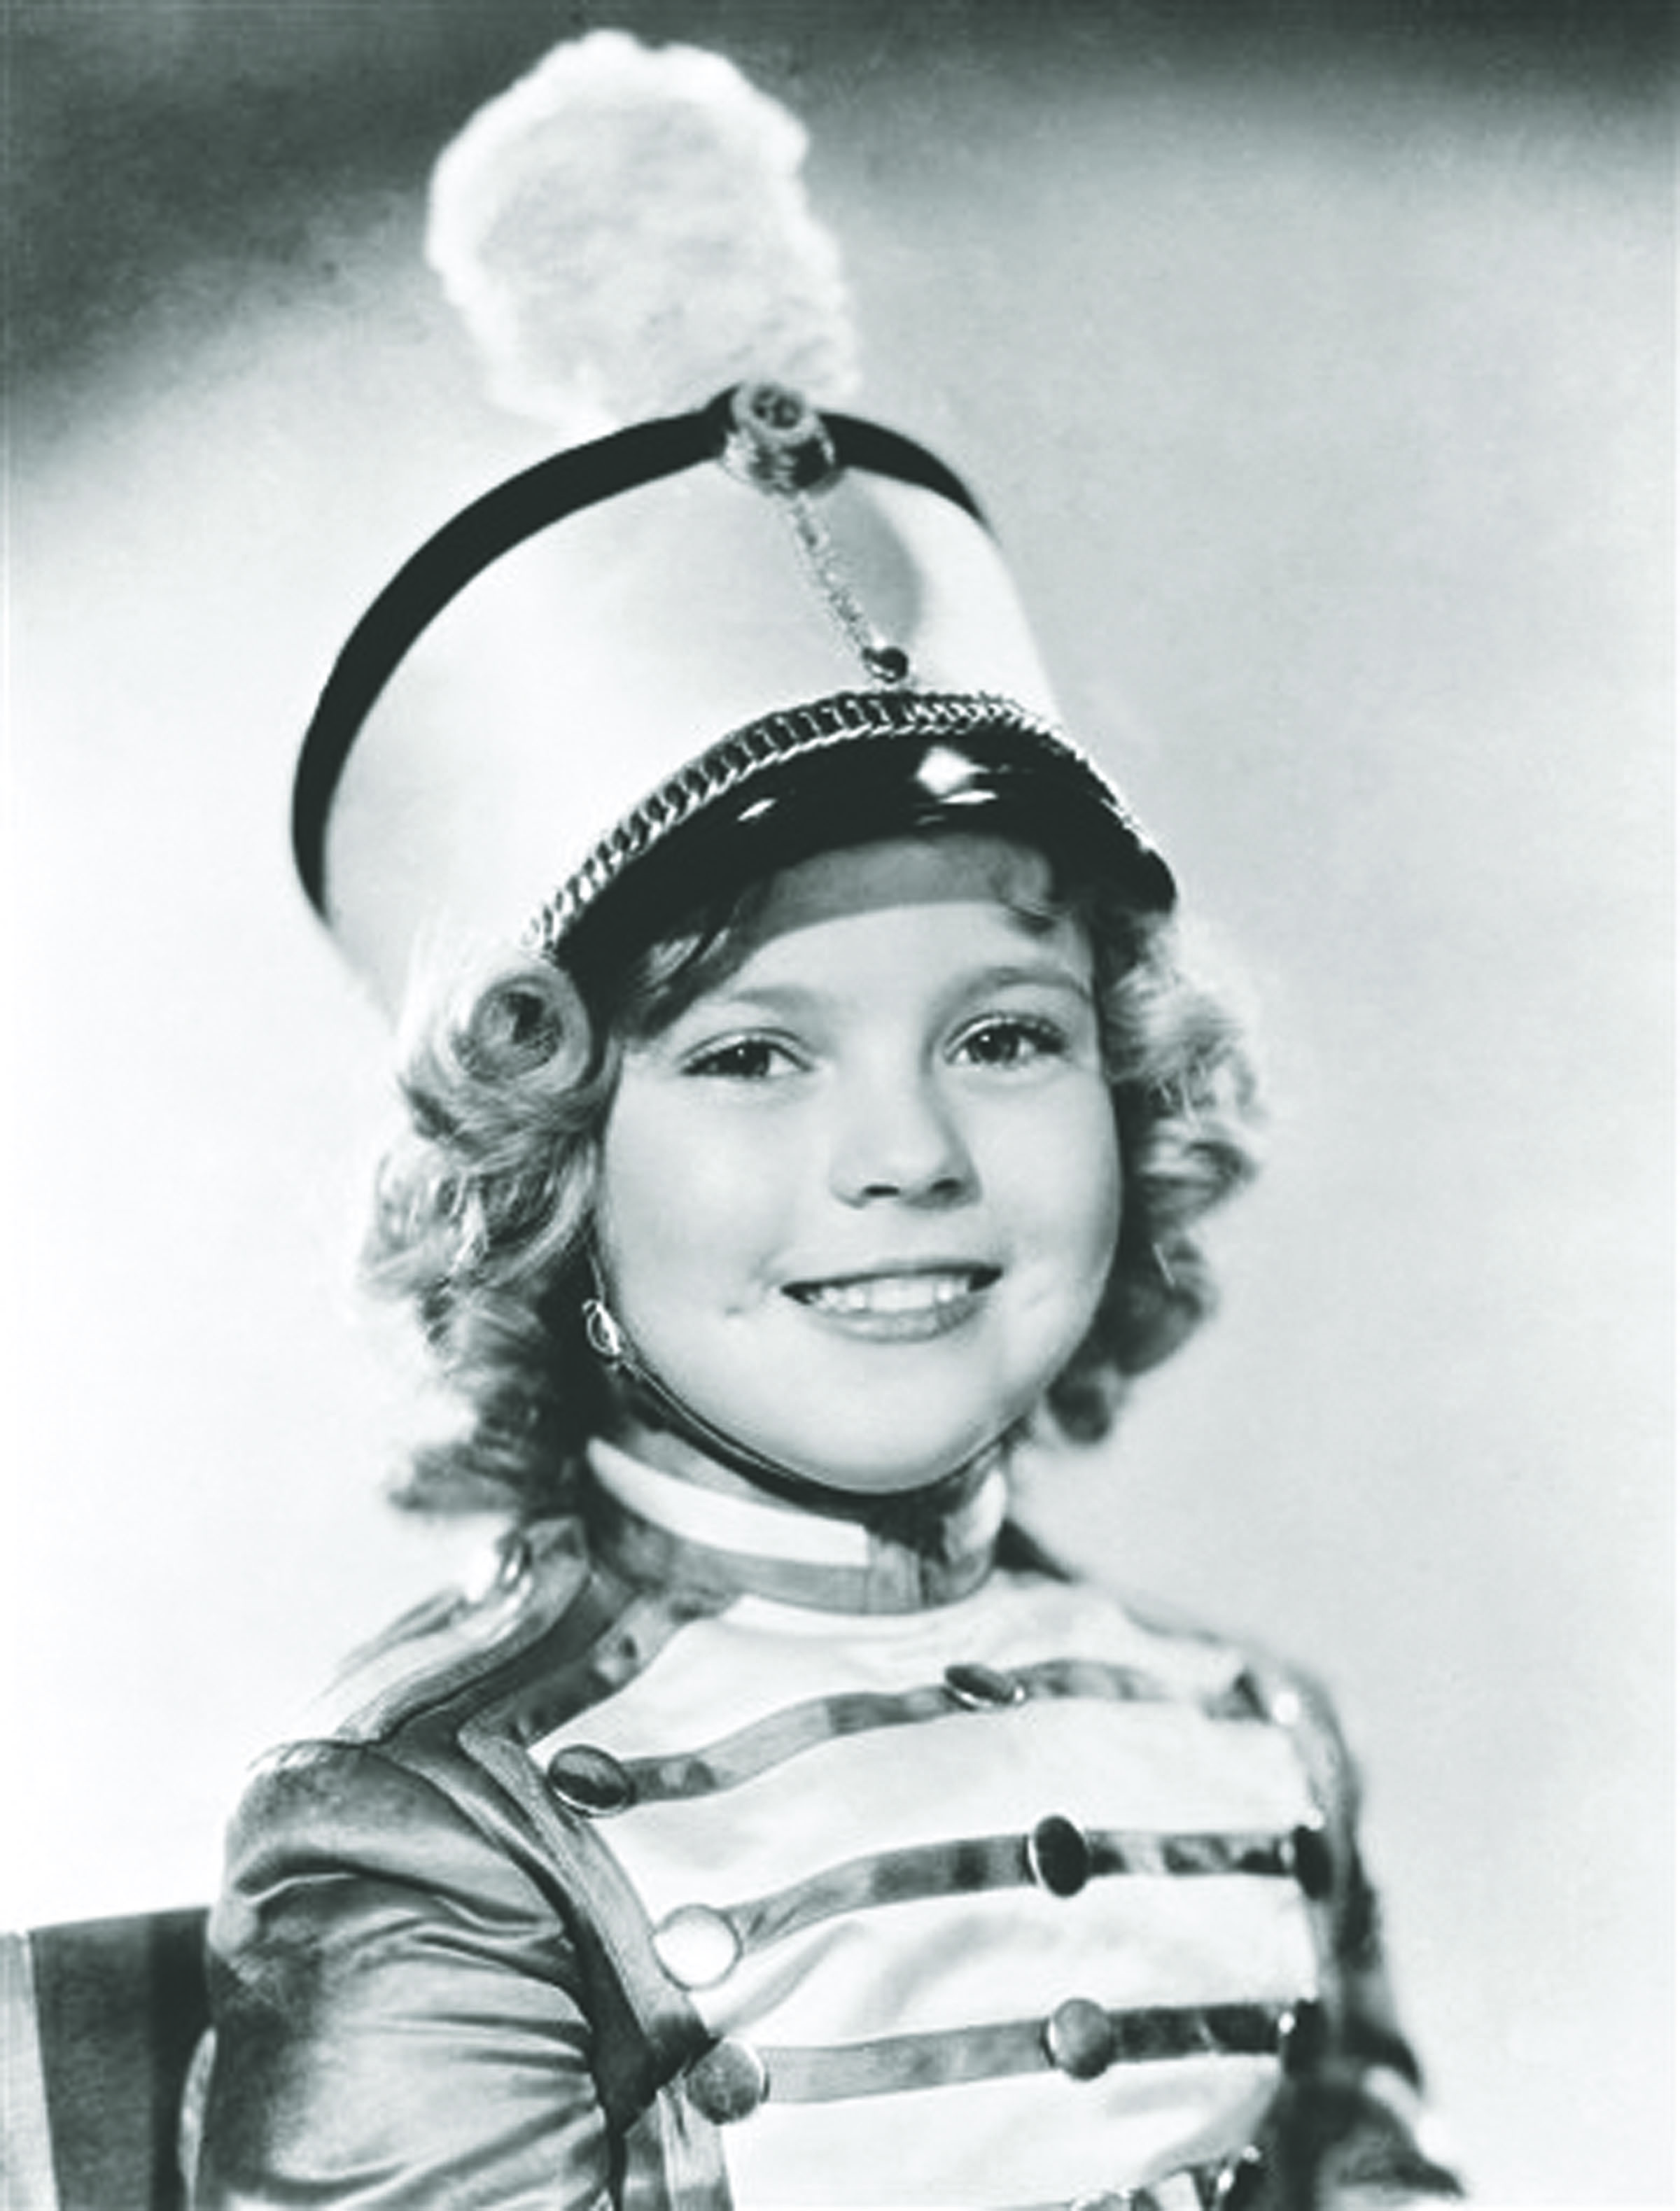 Shirley Temple was America’s top movie draw from 1935 to 1938.